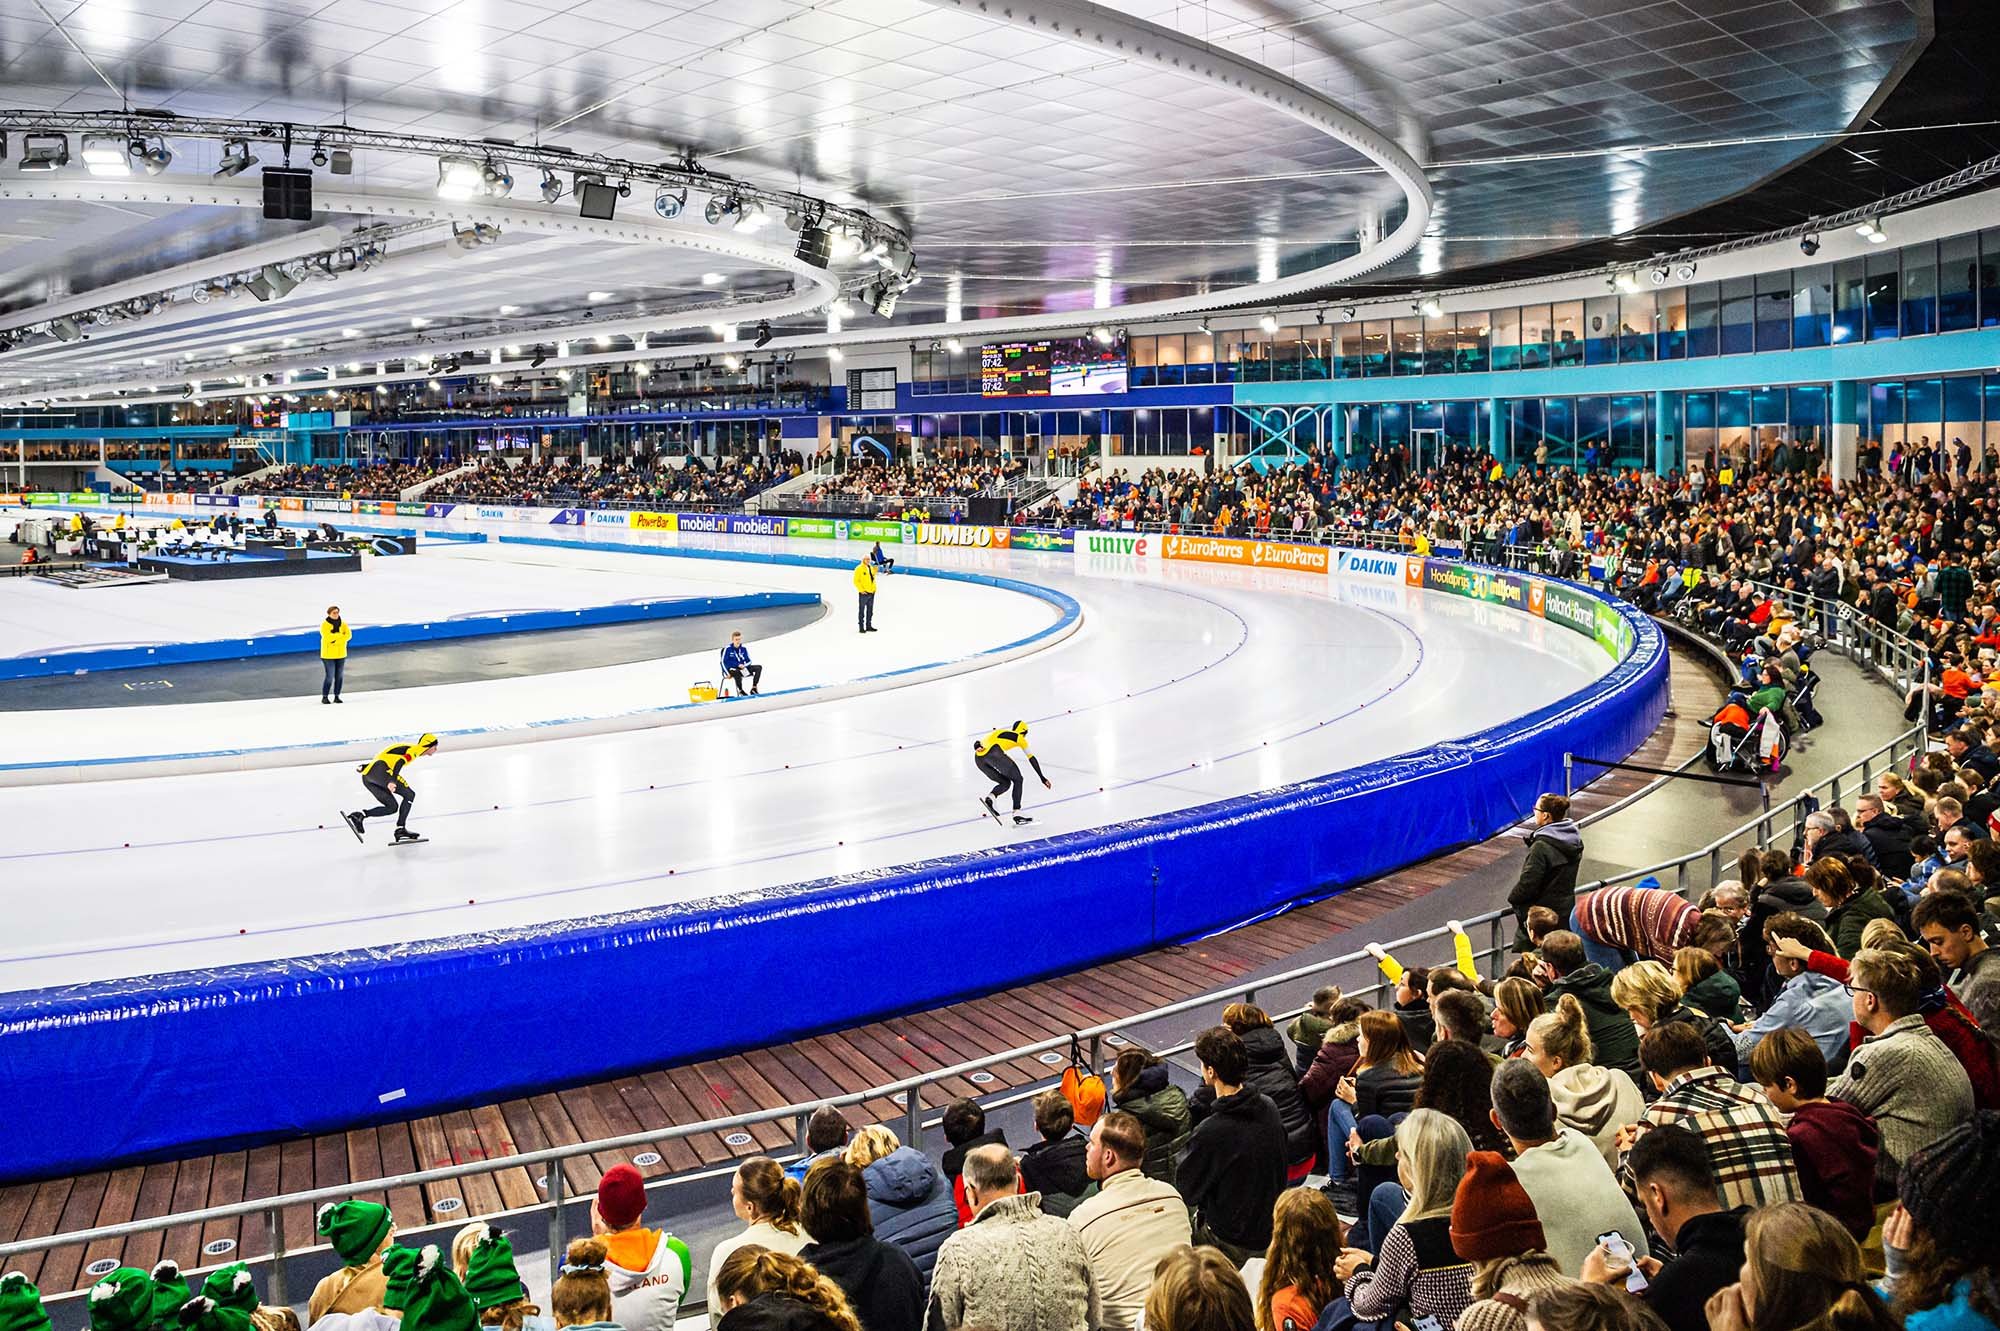 Ice skaters Team Jumbo-Visma in action in a packed Thialf